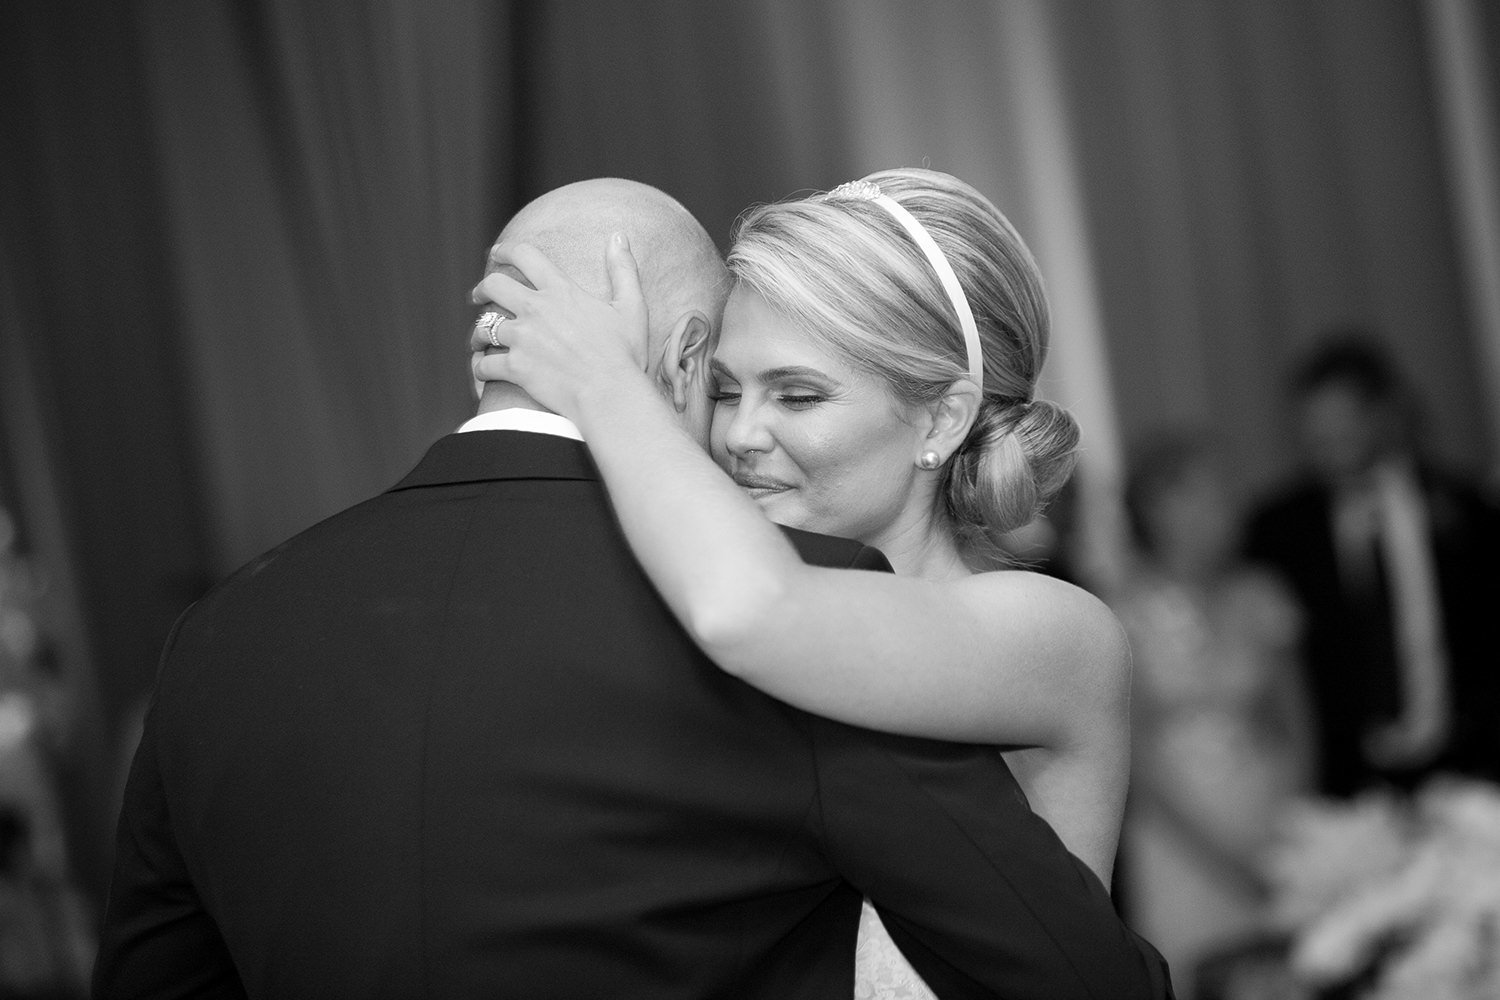 Emotional moment between the bride and her father during the father daughter dance